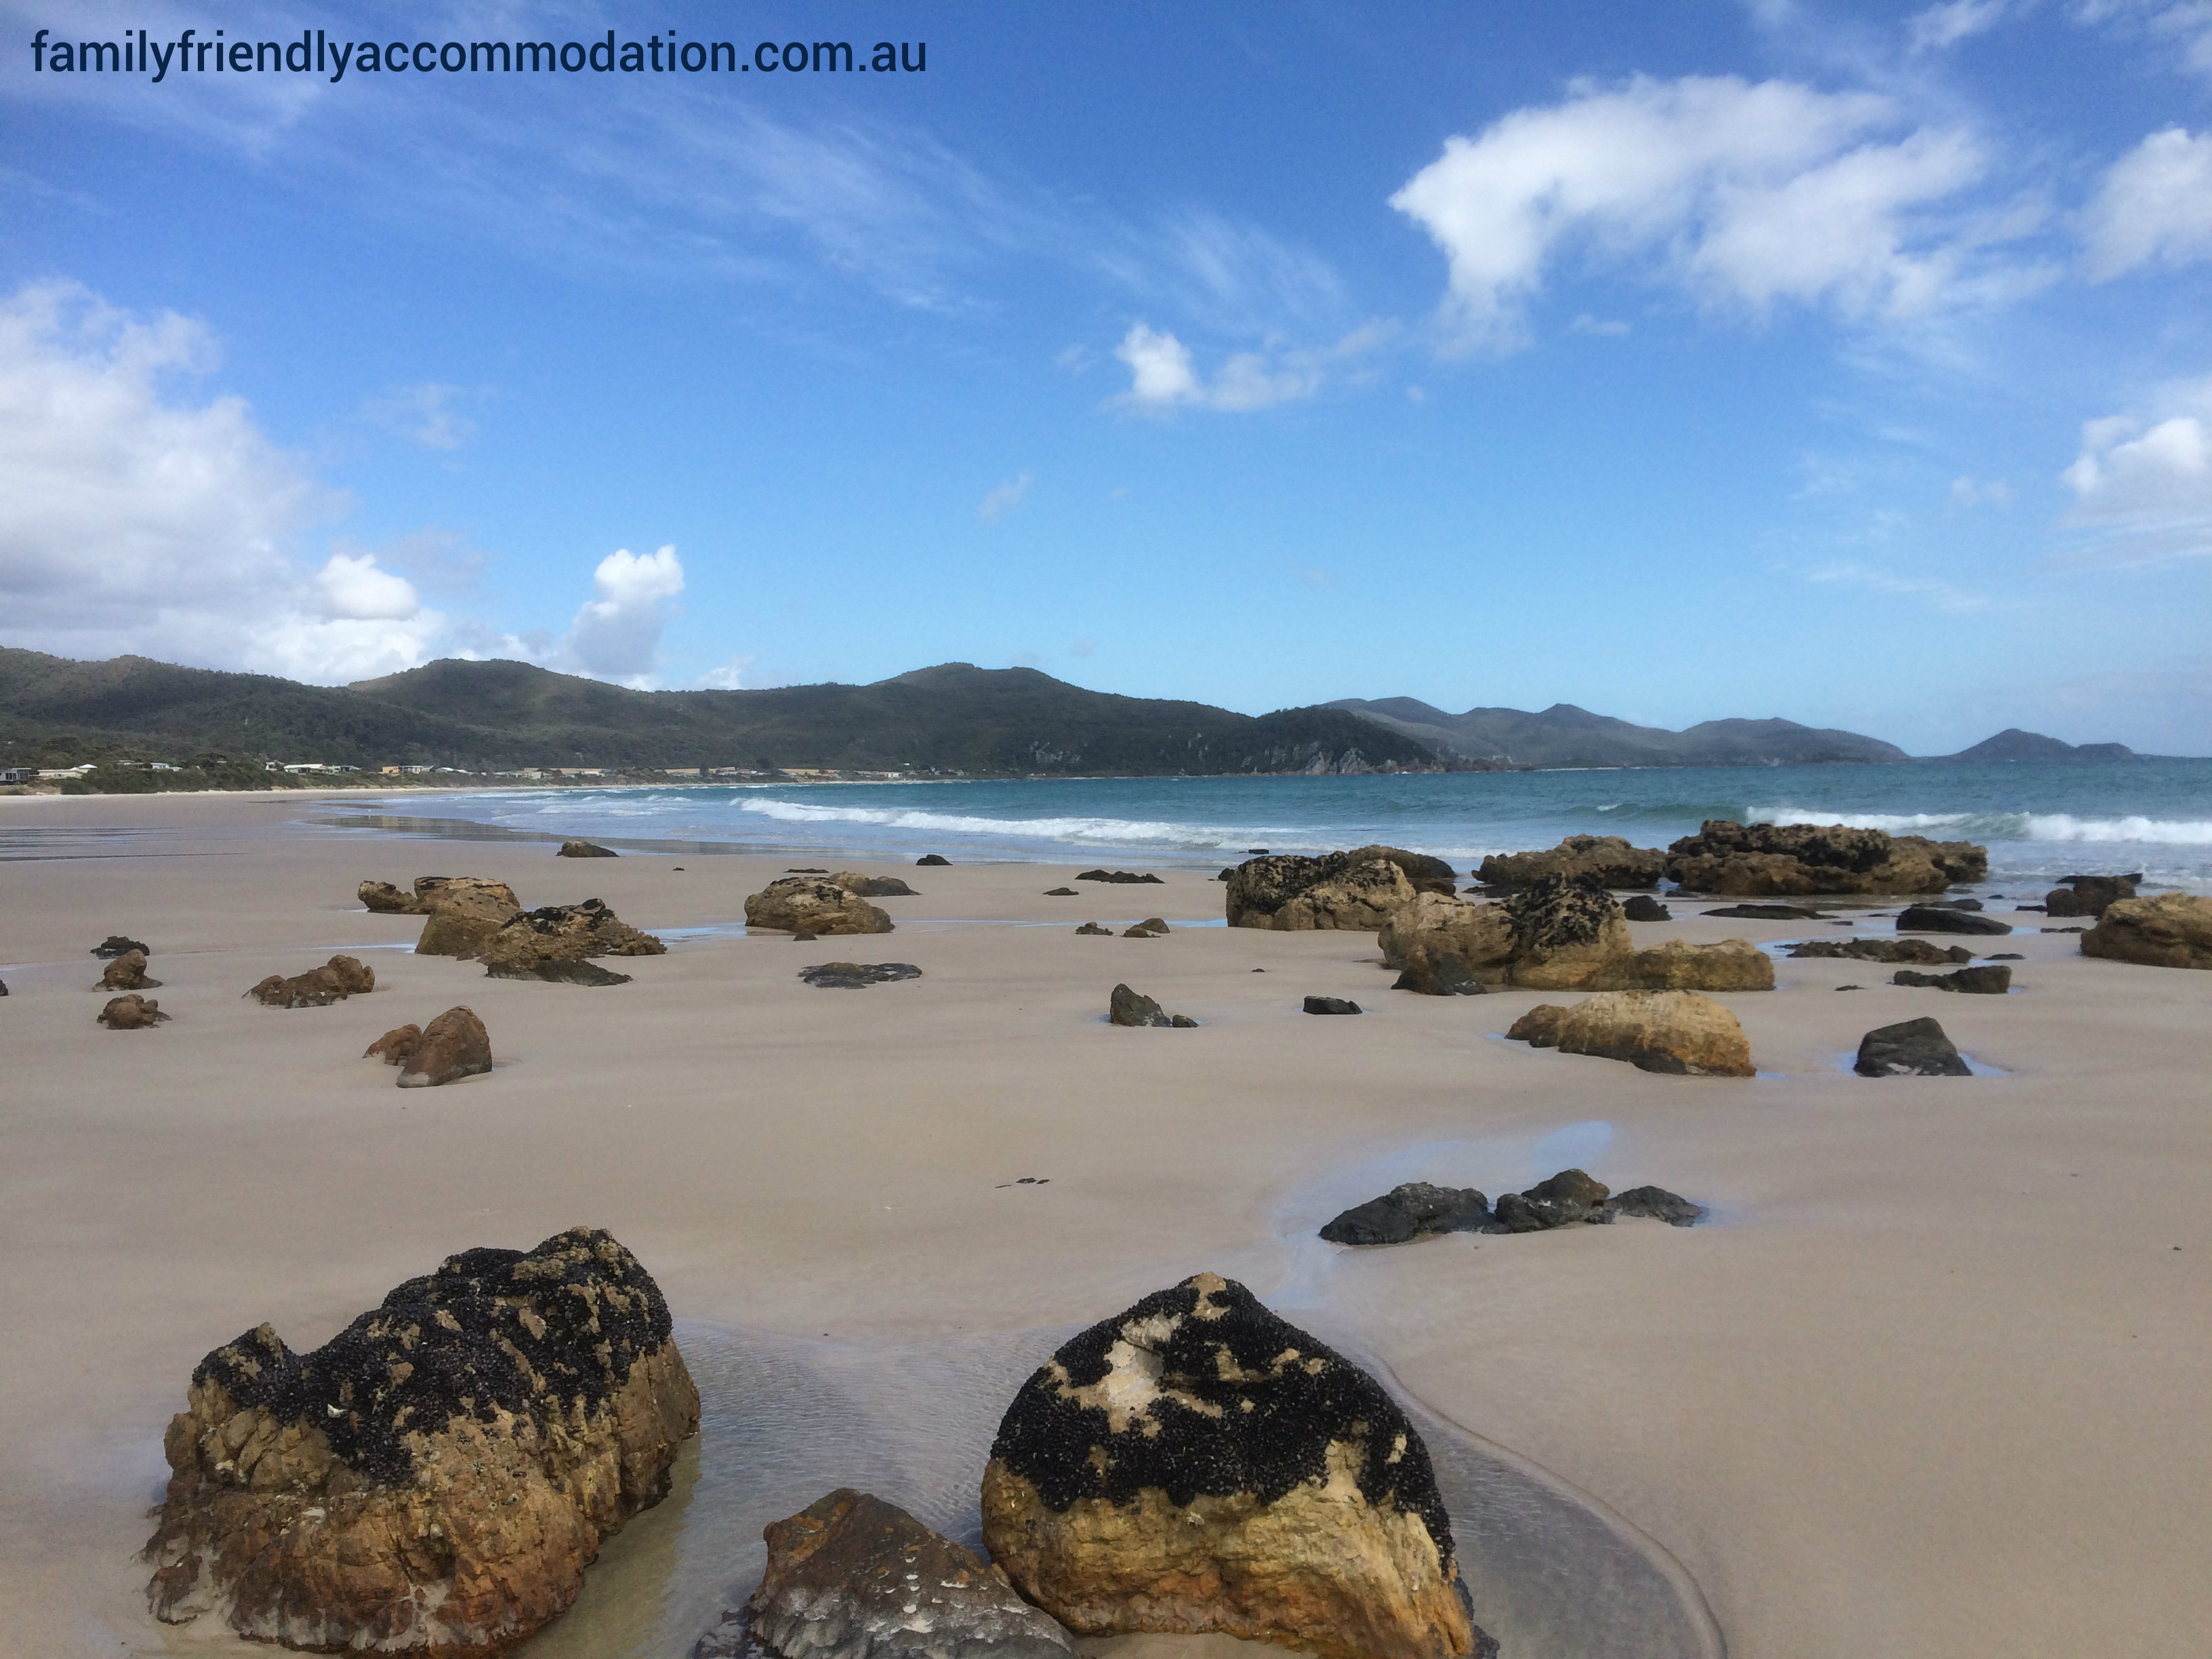 Sisters Beach is one of the stunning beaches you can discover on Tasmania's North West Coast.